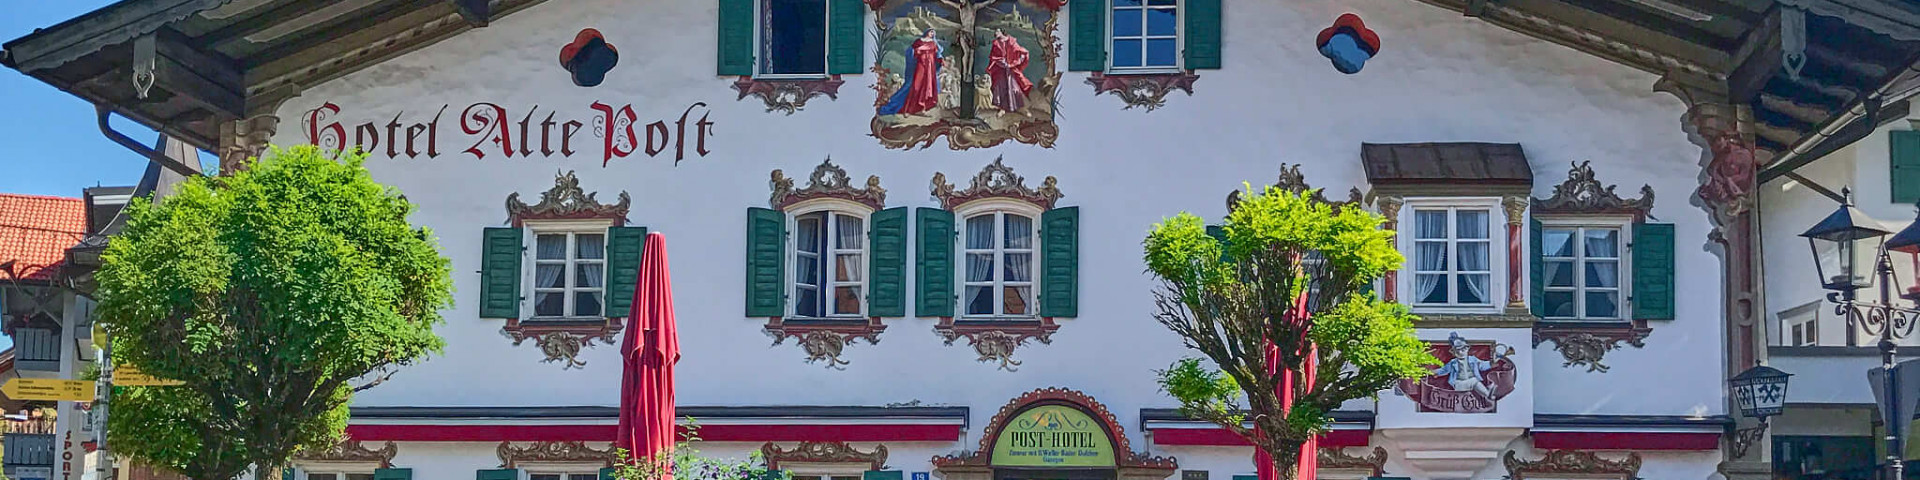 The Post Hotel in the middle of the small town Oberammergau,